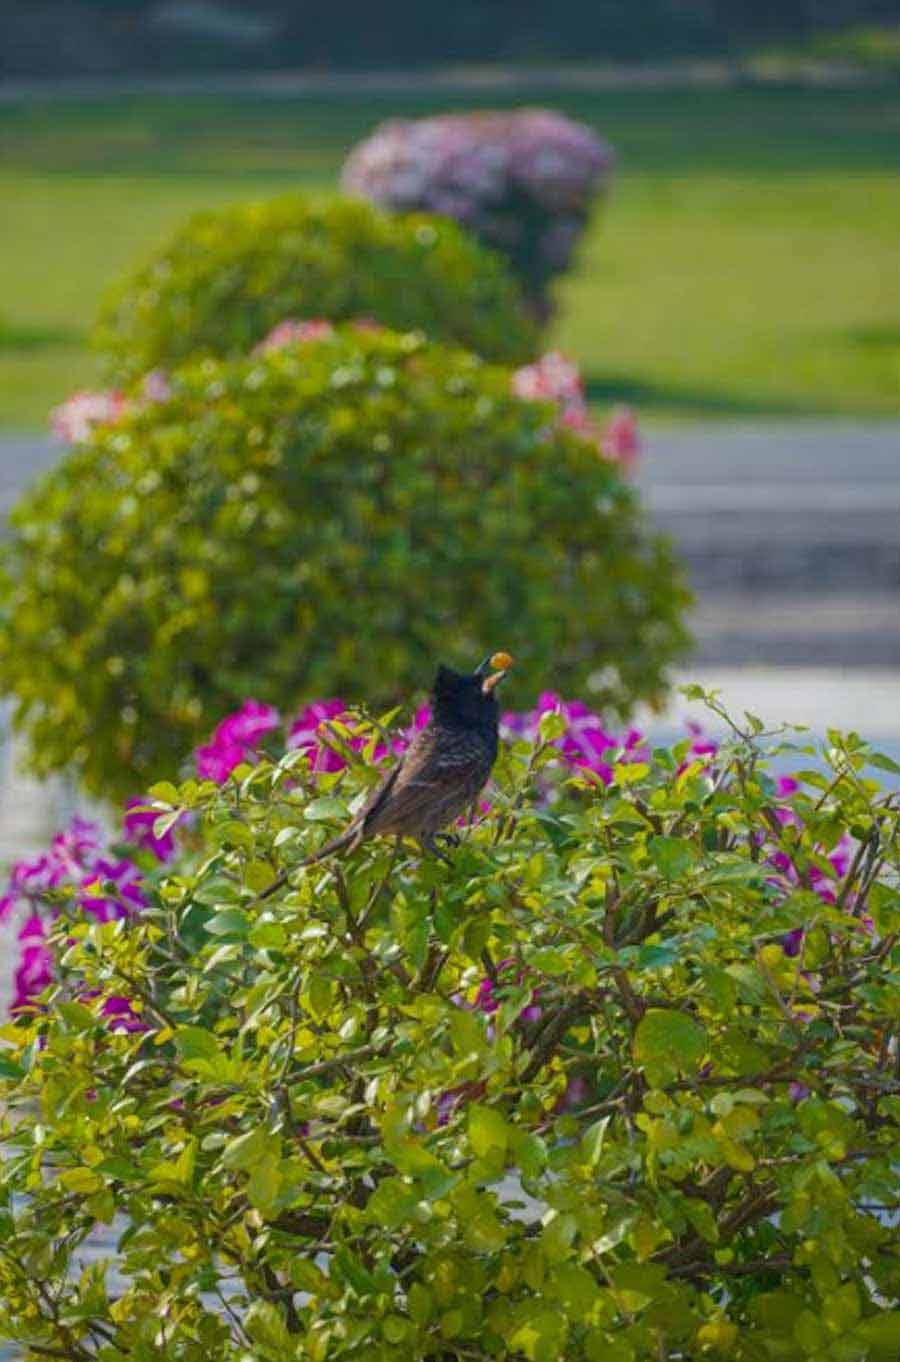 SPRING FEAST: A bulbul feasts on berries at Belur Math on Saturday, February 19